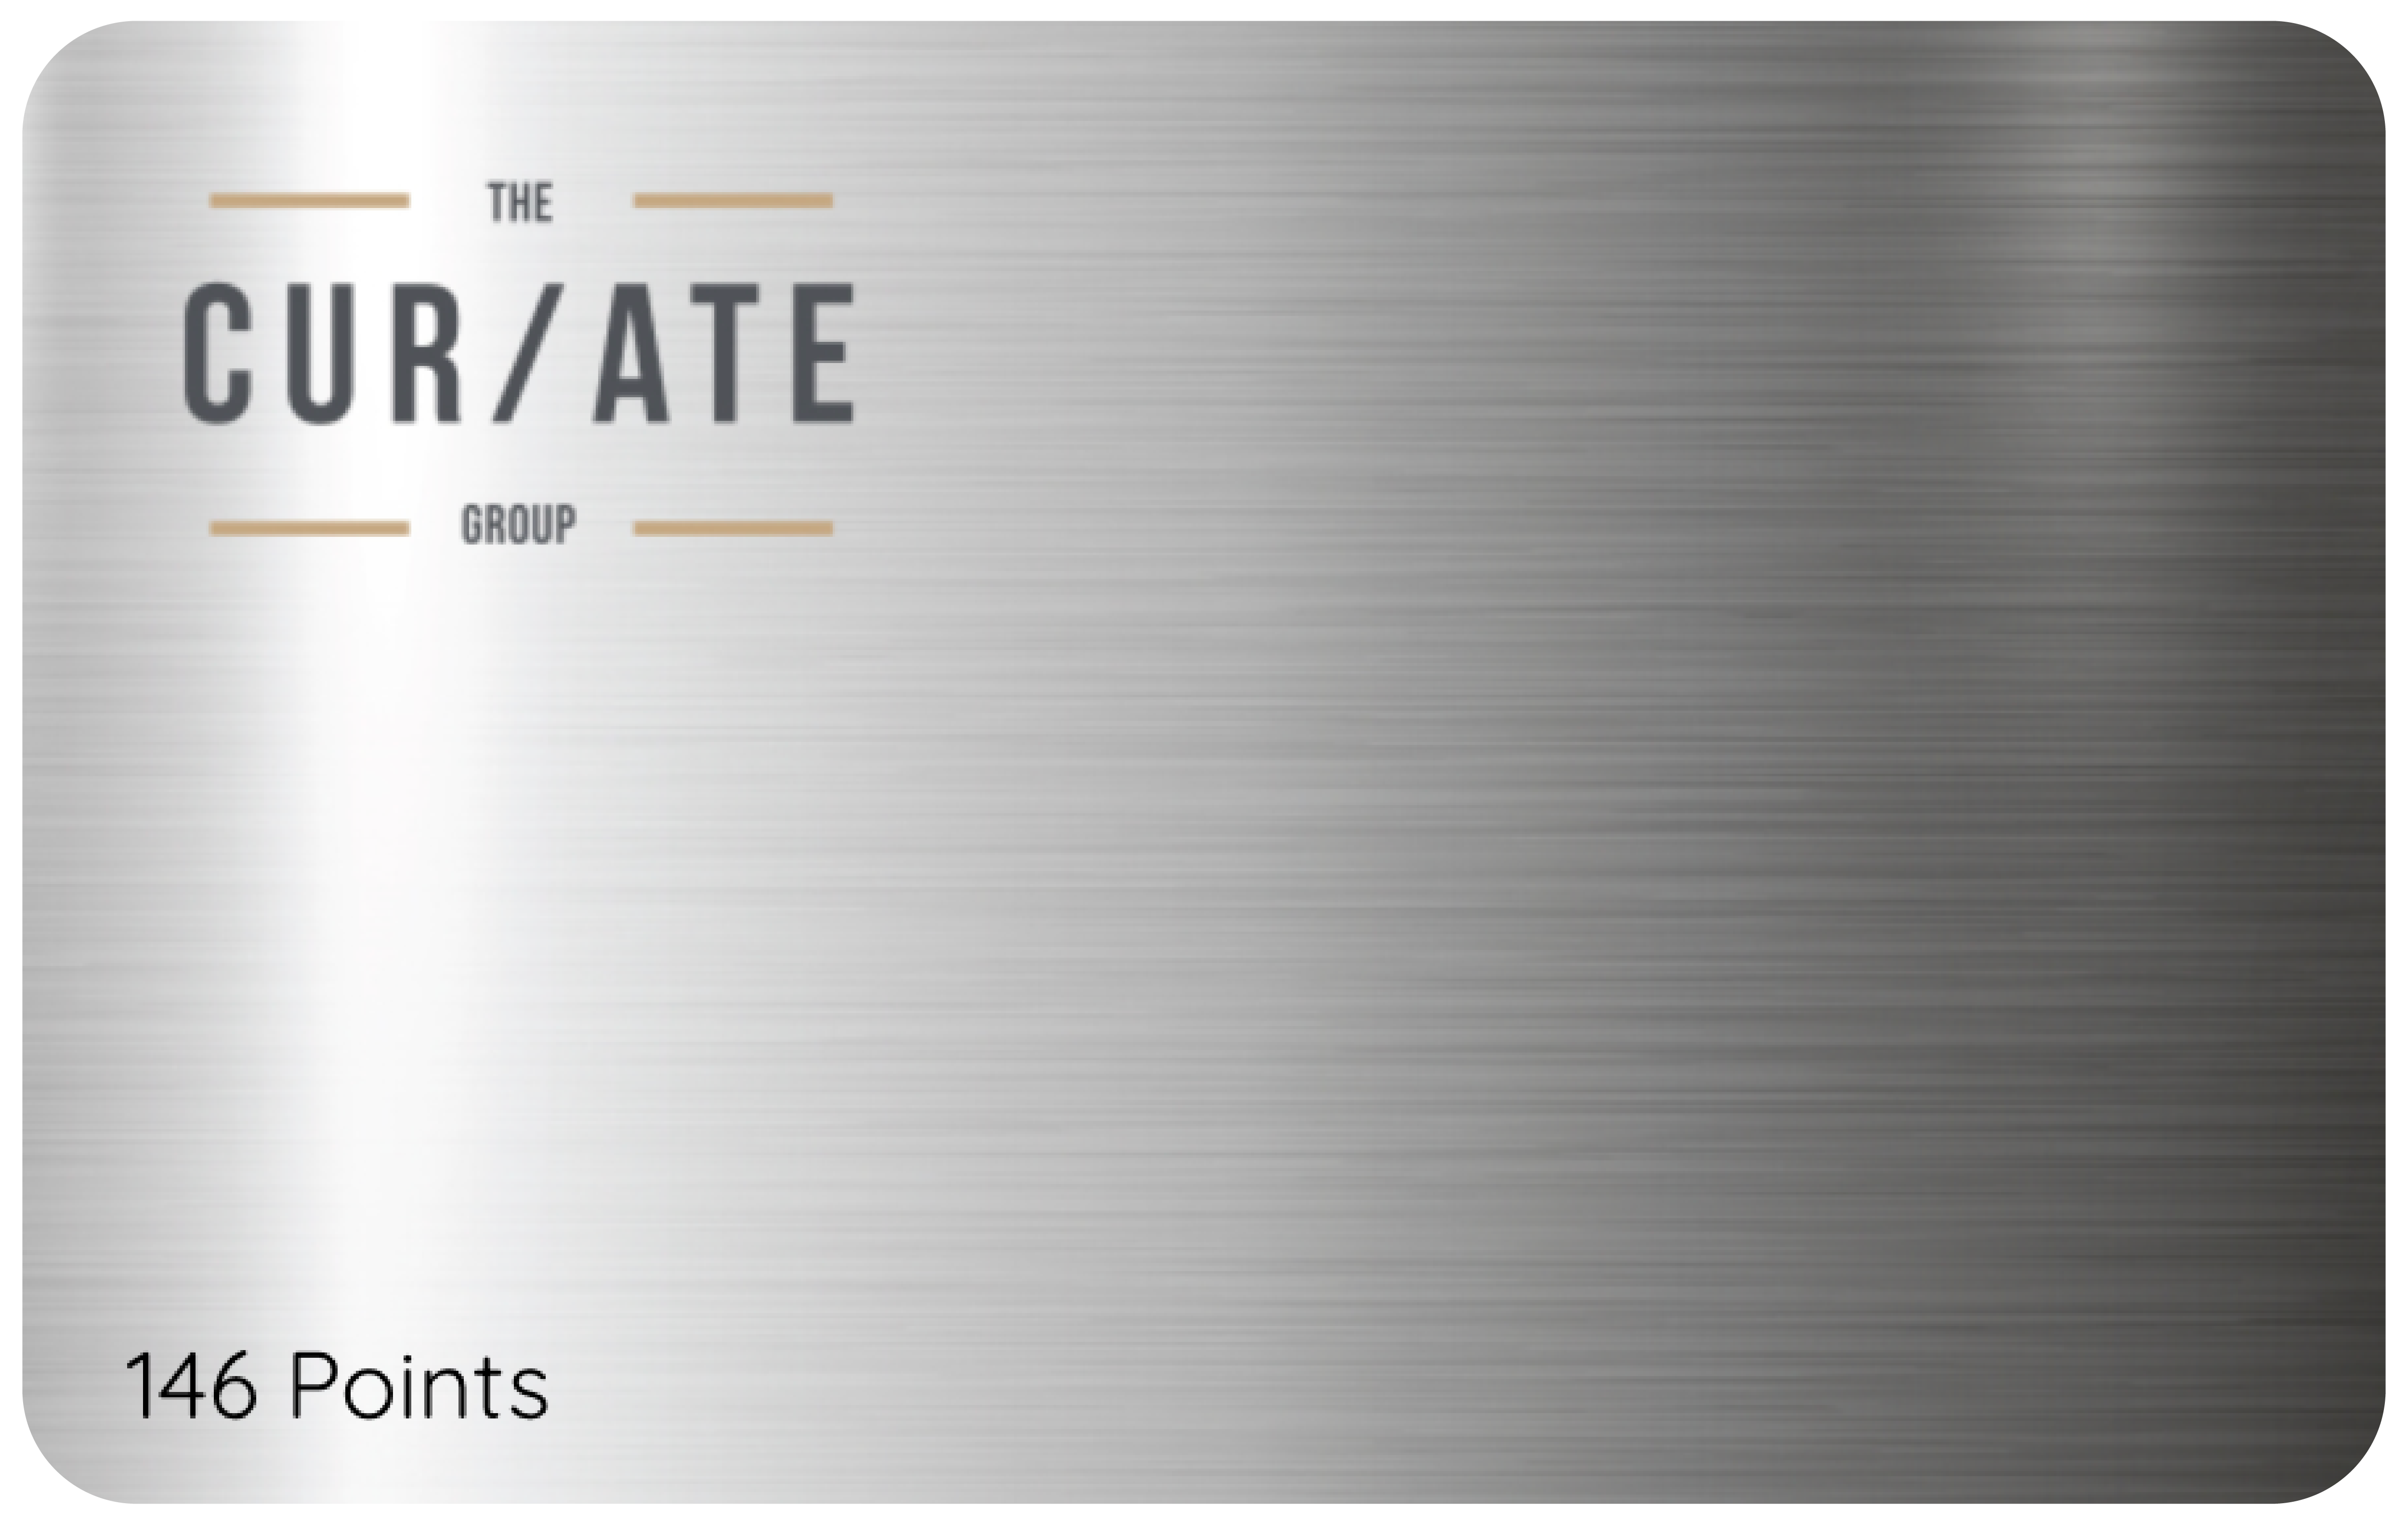 The Curate Group_Member Card